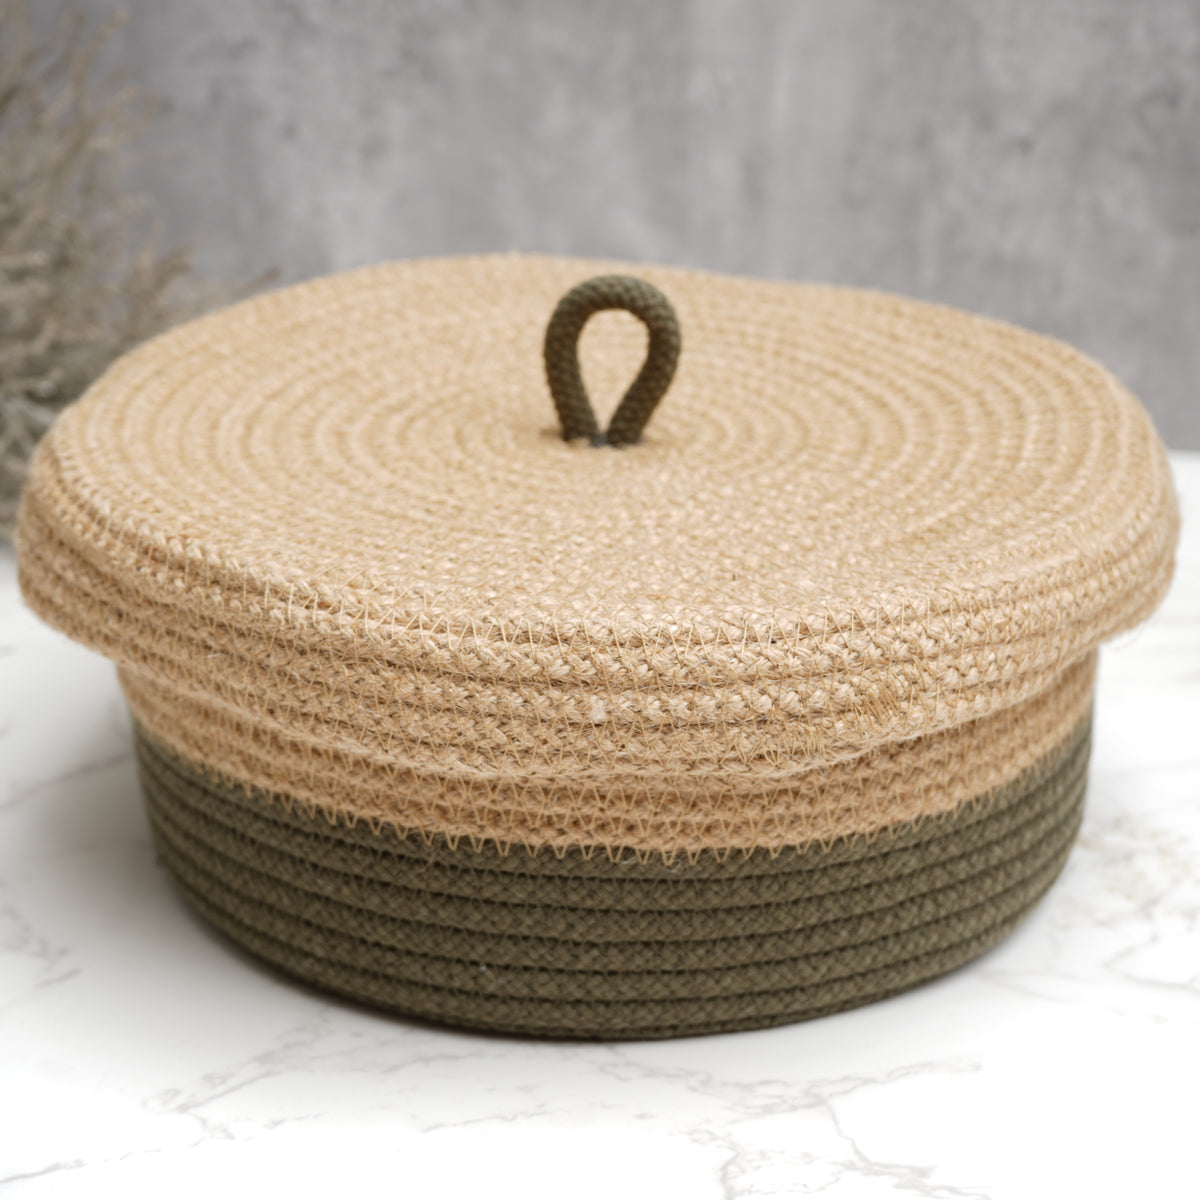 These chic multifunctional baskets are made of 100% cotton rope and are designed to suit any room. Made from 100% eco-friendly material: cotton rope. 100% handmade. Exclusive to Sophistik